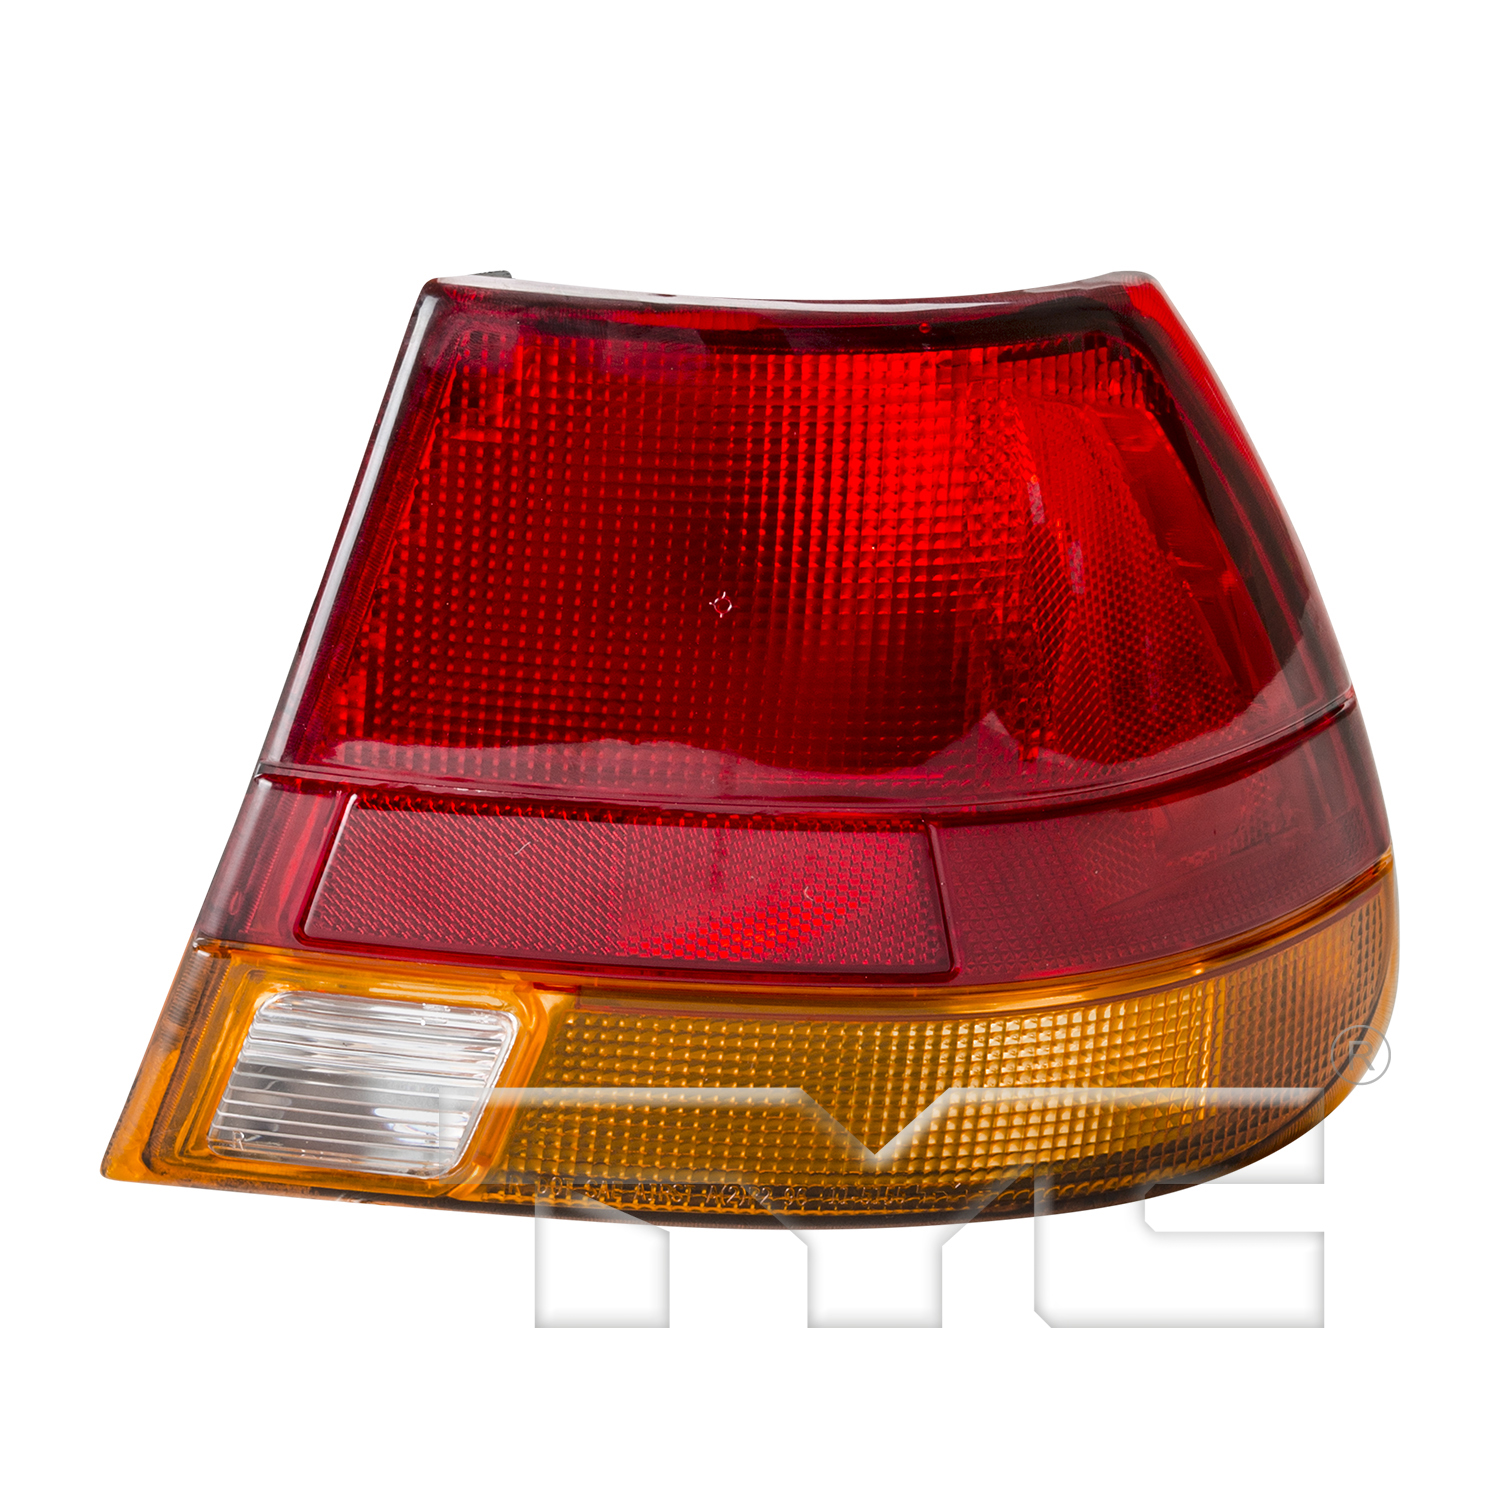 Aftermarket TAILLIGHTS for SATURN - SL1, SL1,96-97,RT Taillamp lens/housing